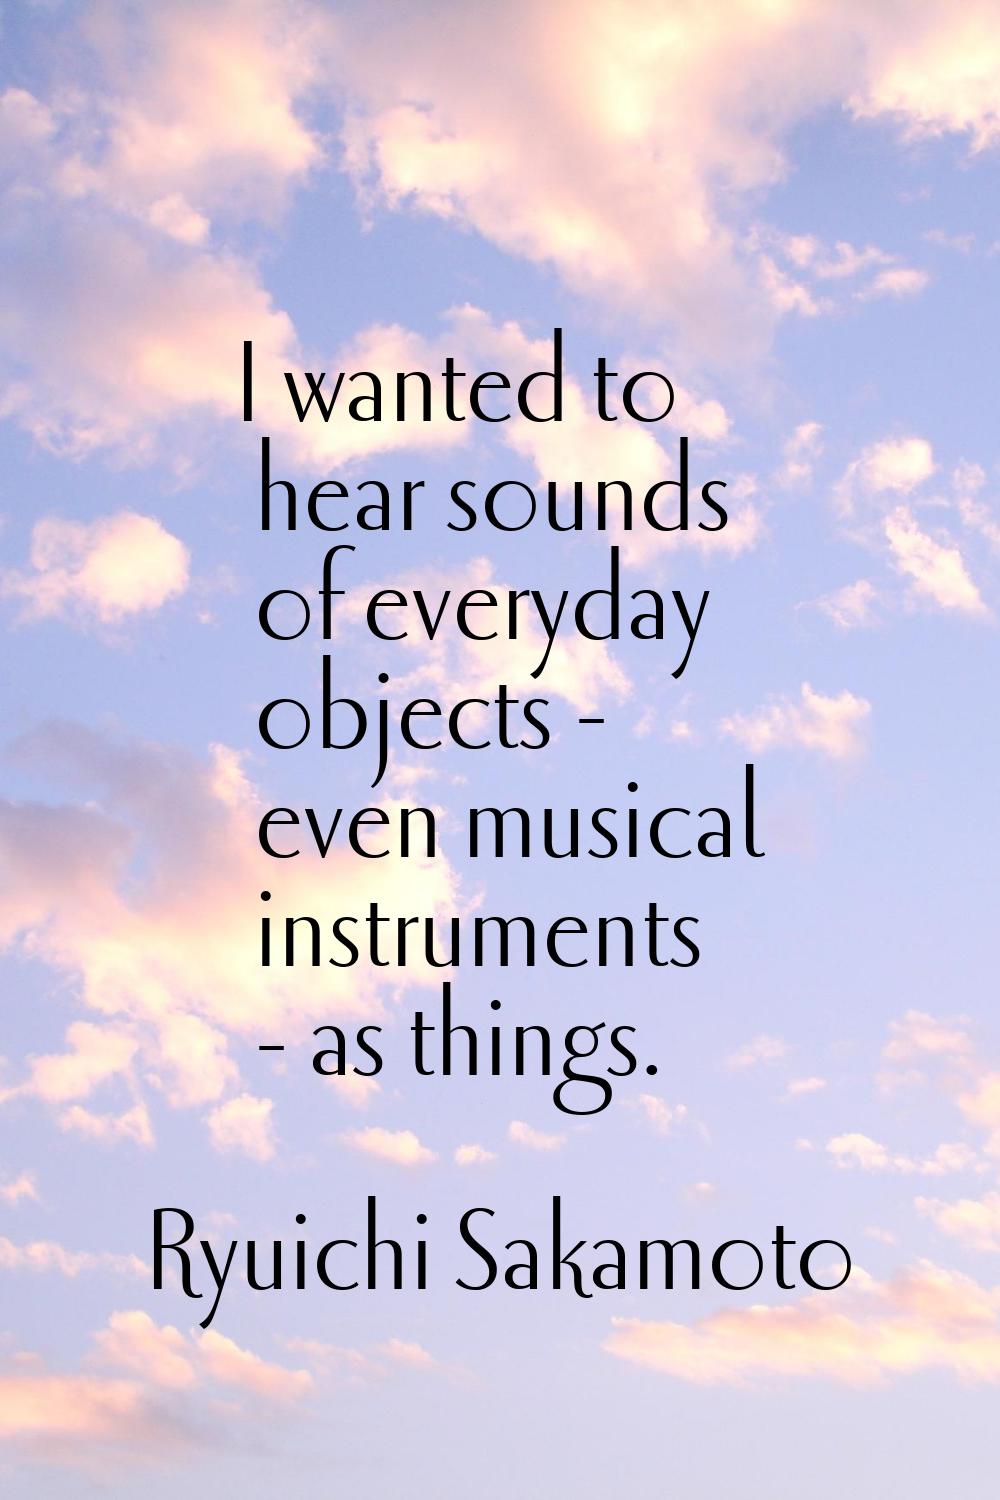 I wanted to hear sounds of everyday objects - even musical instruments - as things.